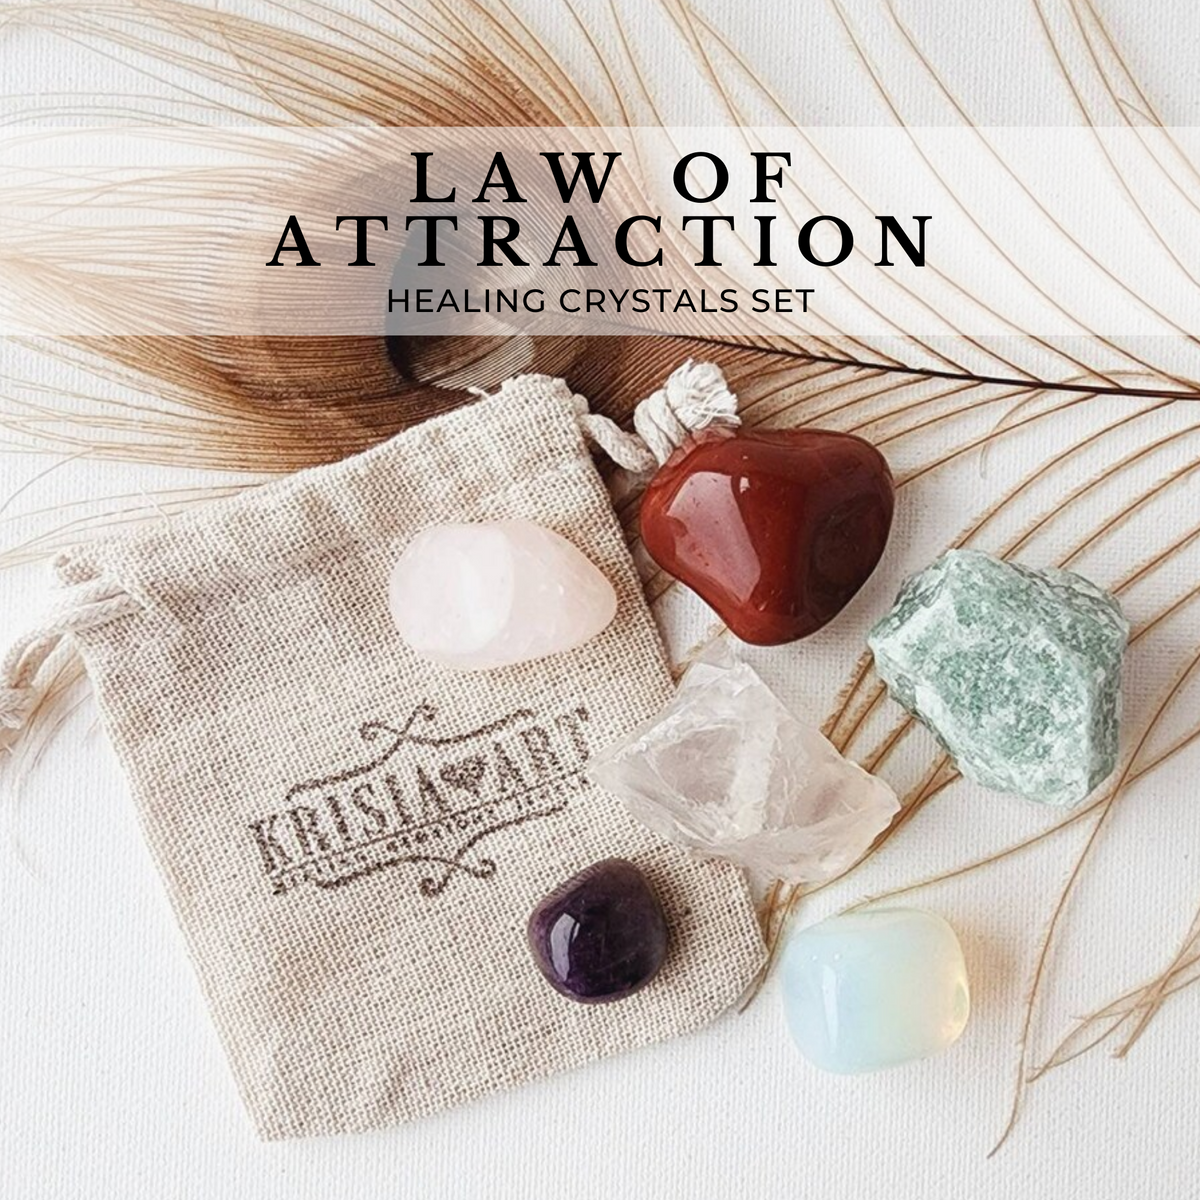 LAW OF ATTRACTION crystal set for attracting wealth, abundance, love, happiness and manifest intentions. Red Jasper, Clear Quartz, Green Aventurine, Opalite, Rose Quartz, Amethyst. 